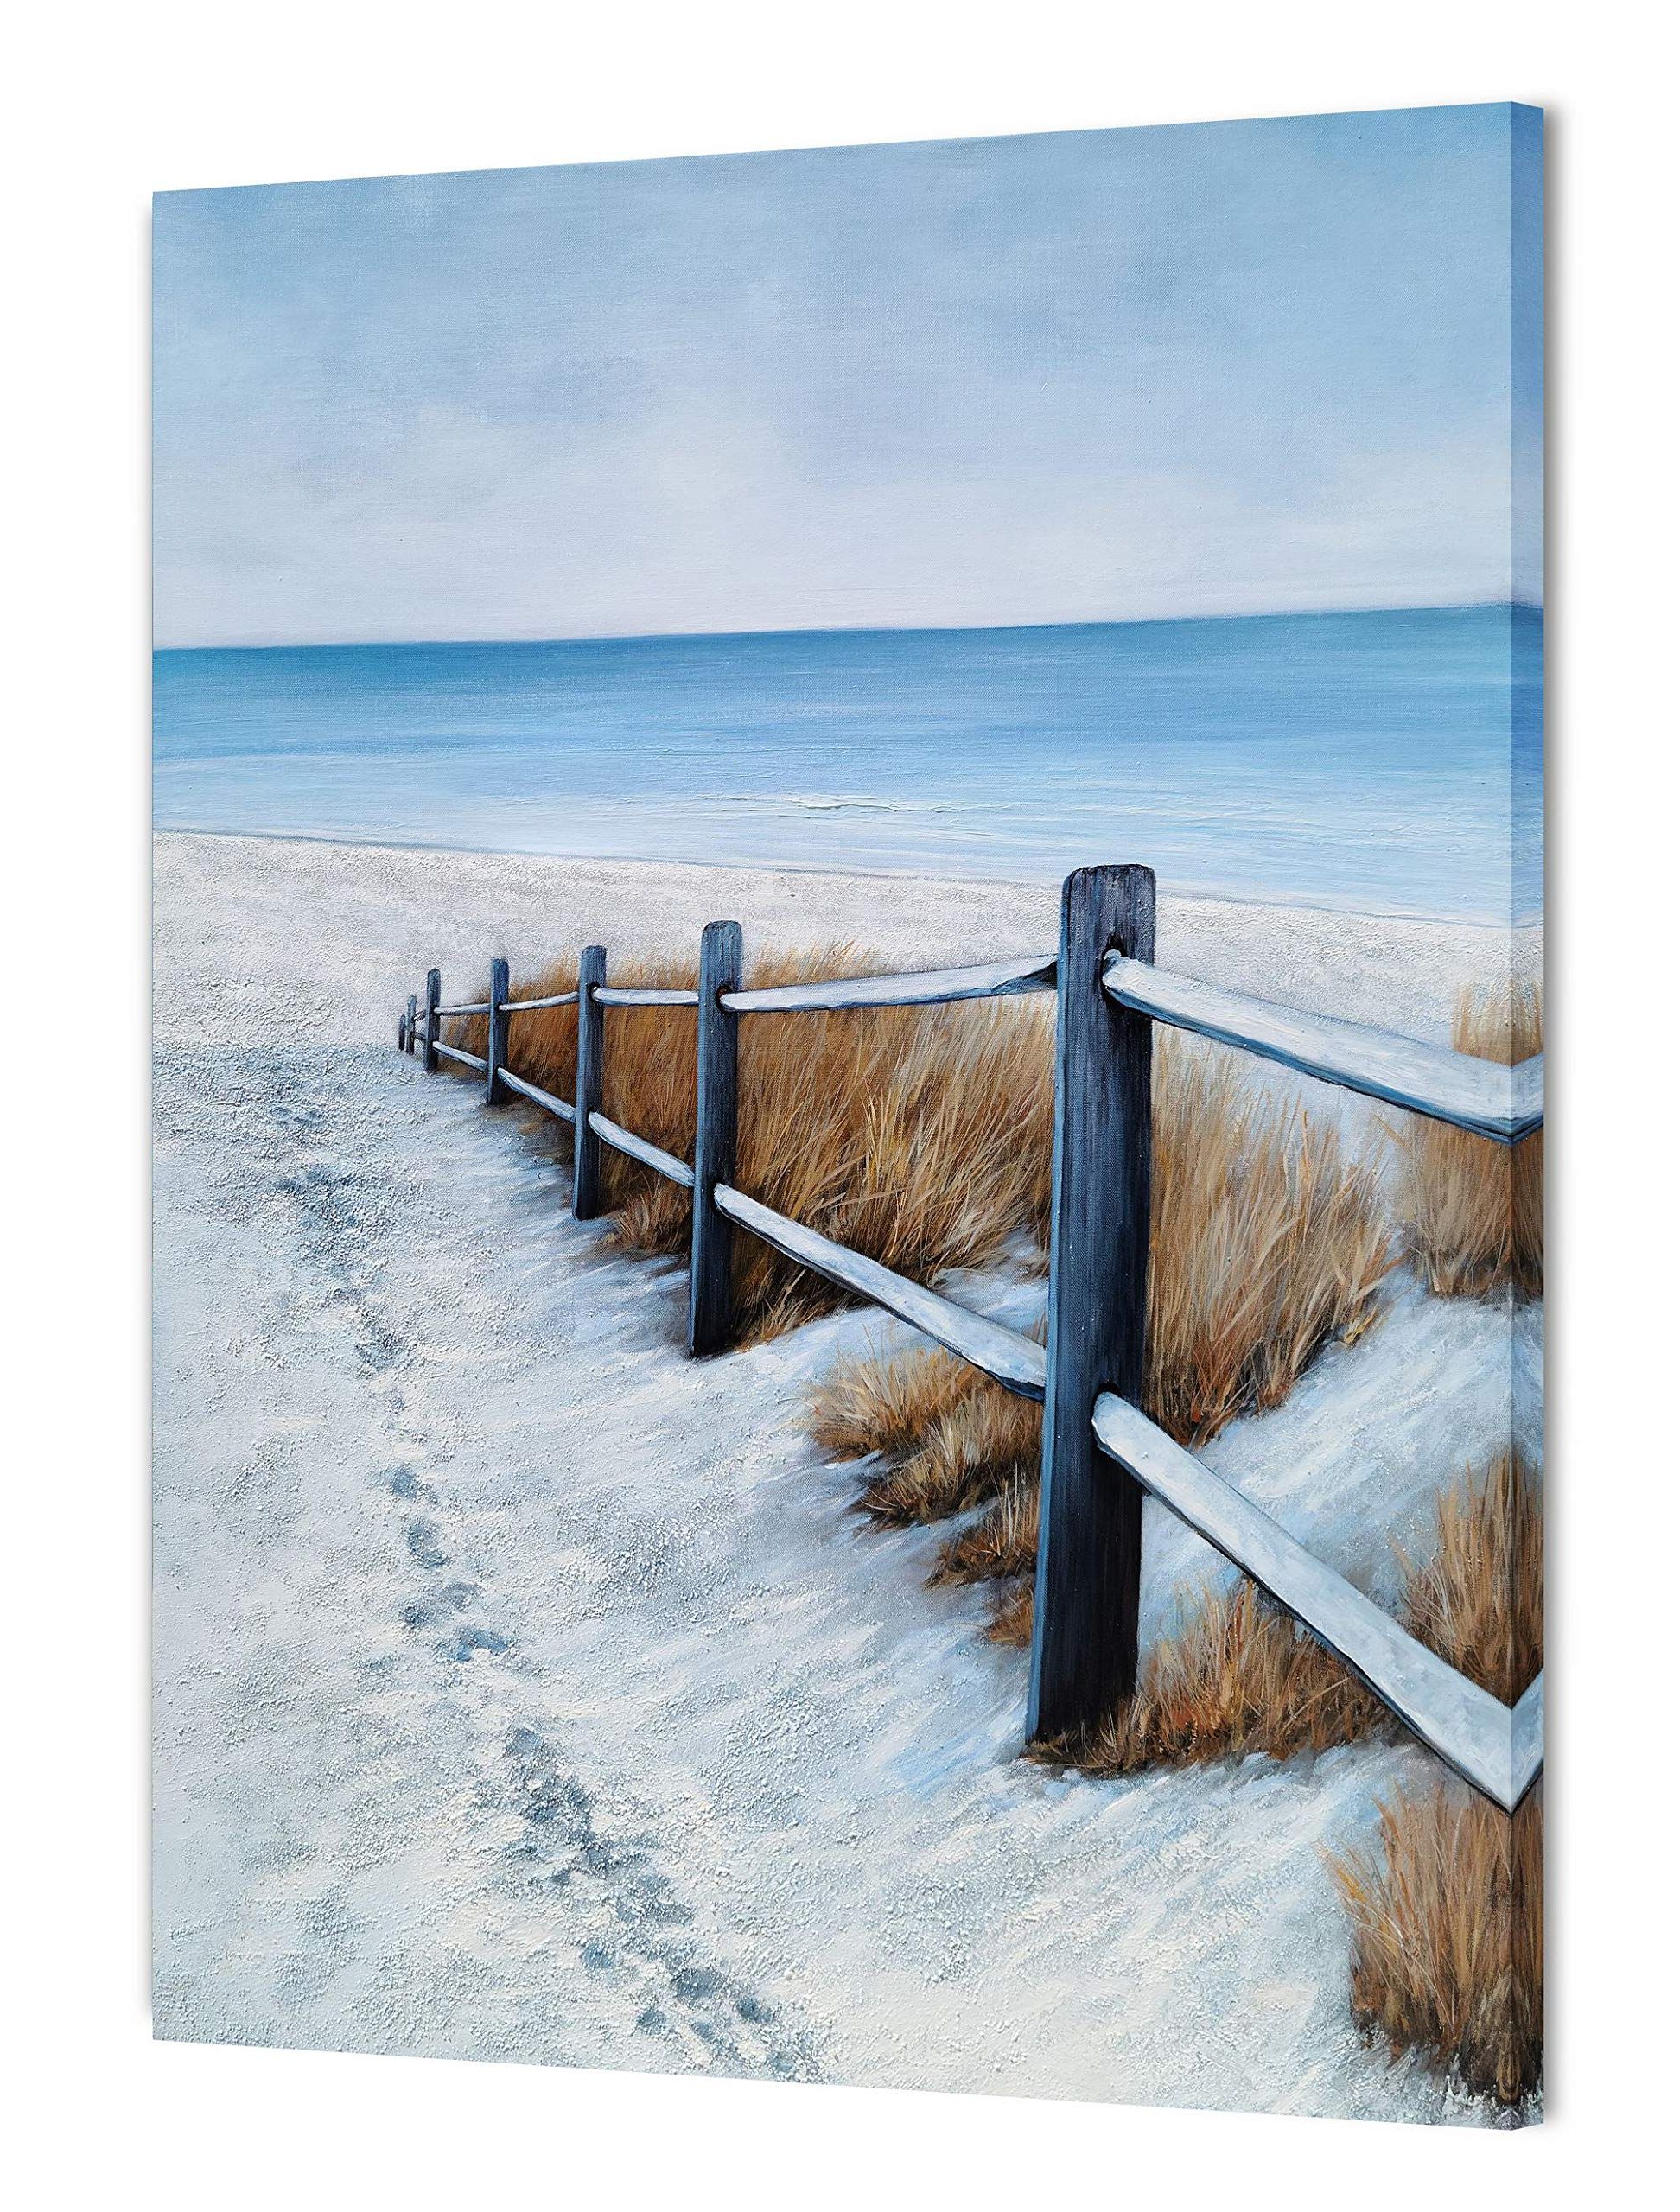 Most Recent Amazon: Yhsky Arts Beach Canvas Wall Art – Blue And White Painting With  Fence, Modern Abstract Coastal Pictures For Living Room Bedroom Bathroom  Decor: Posters & Prints In Bathroom Bedroom Fence Wall Art (View 2 of 15)